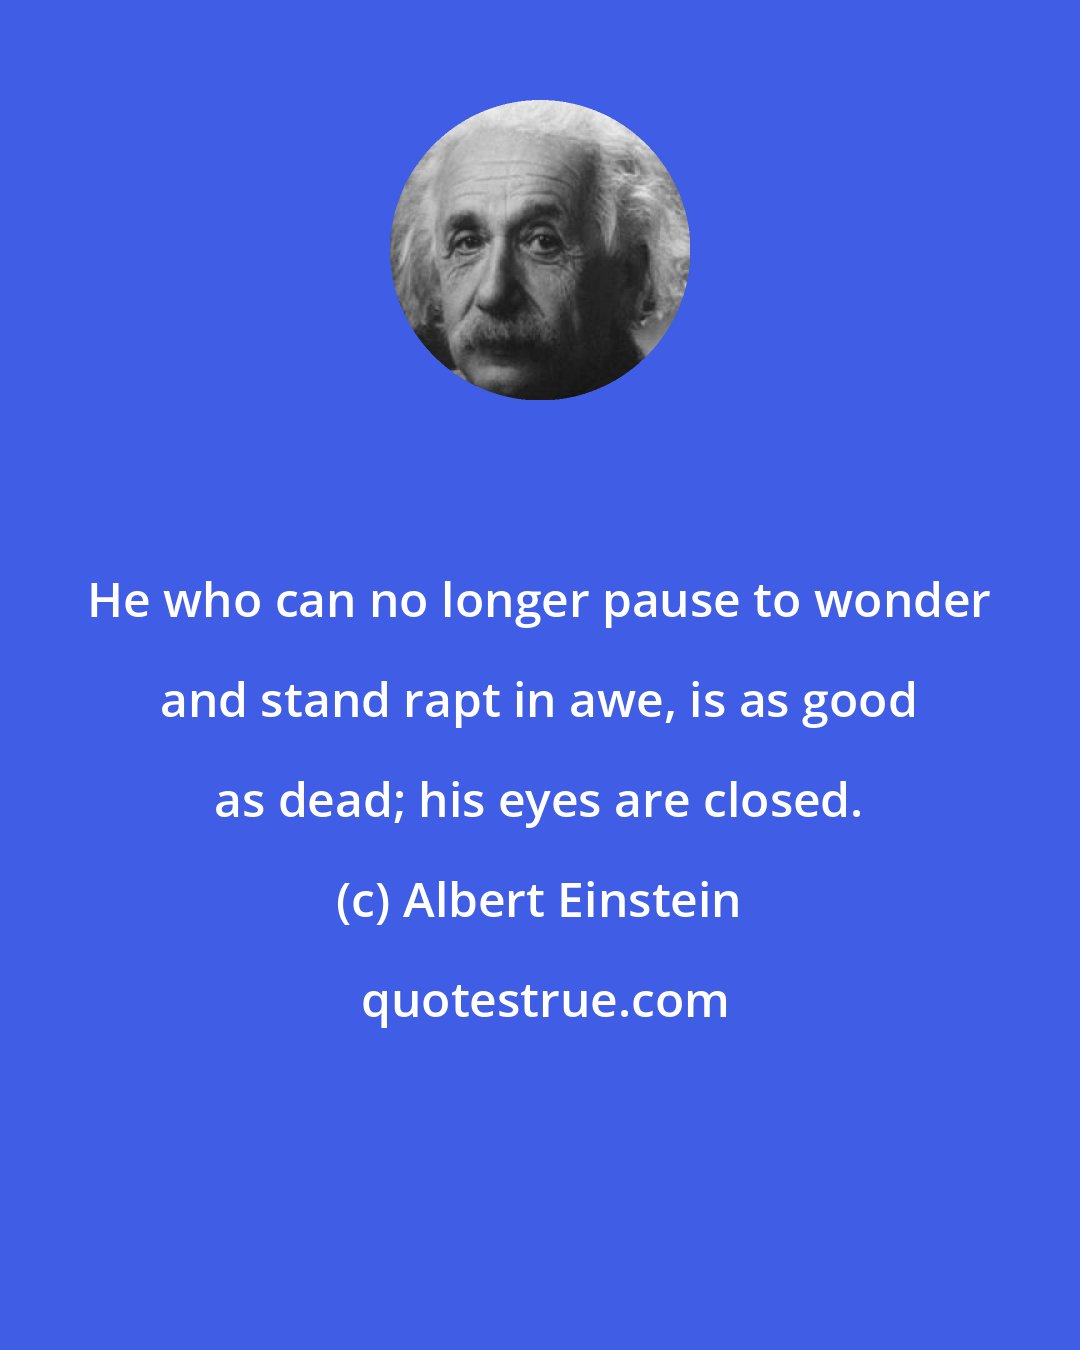 Albert Einstein: He who can no longer pause to wonder and stand rapt in awe, is as good as dead; his eyes are closed.